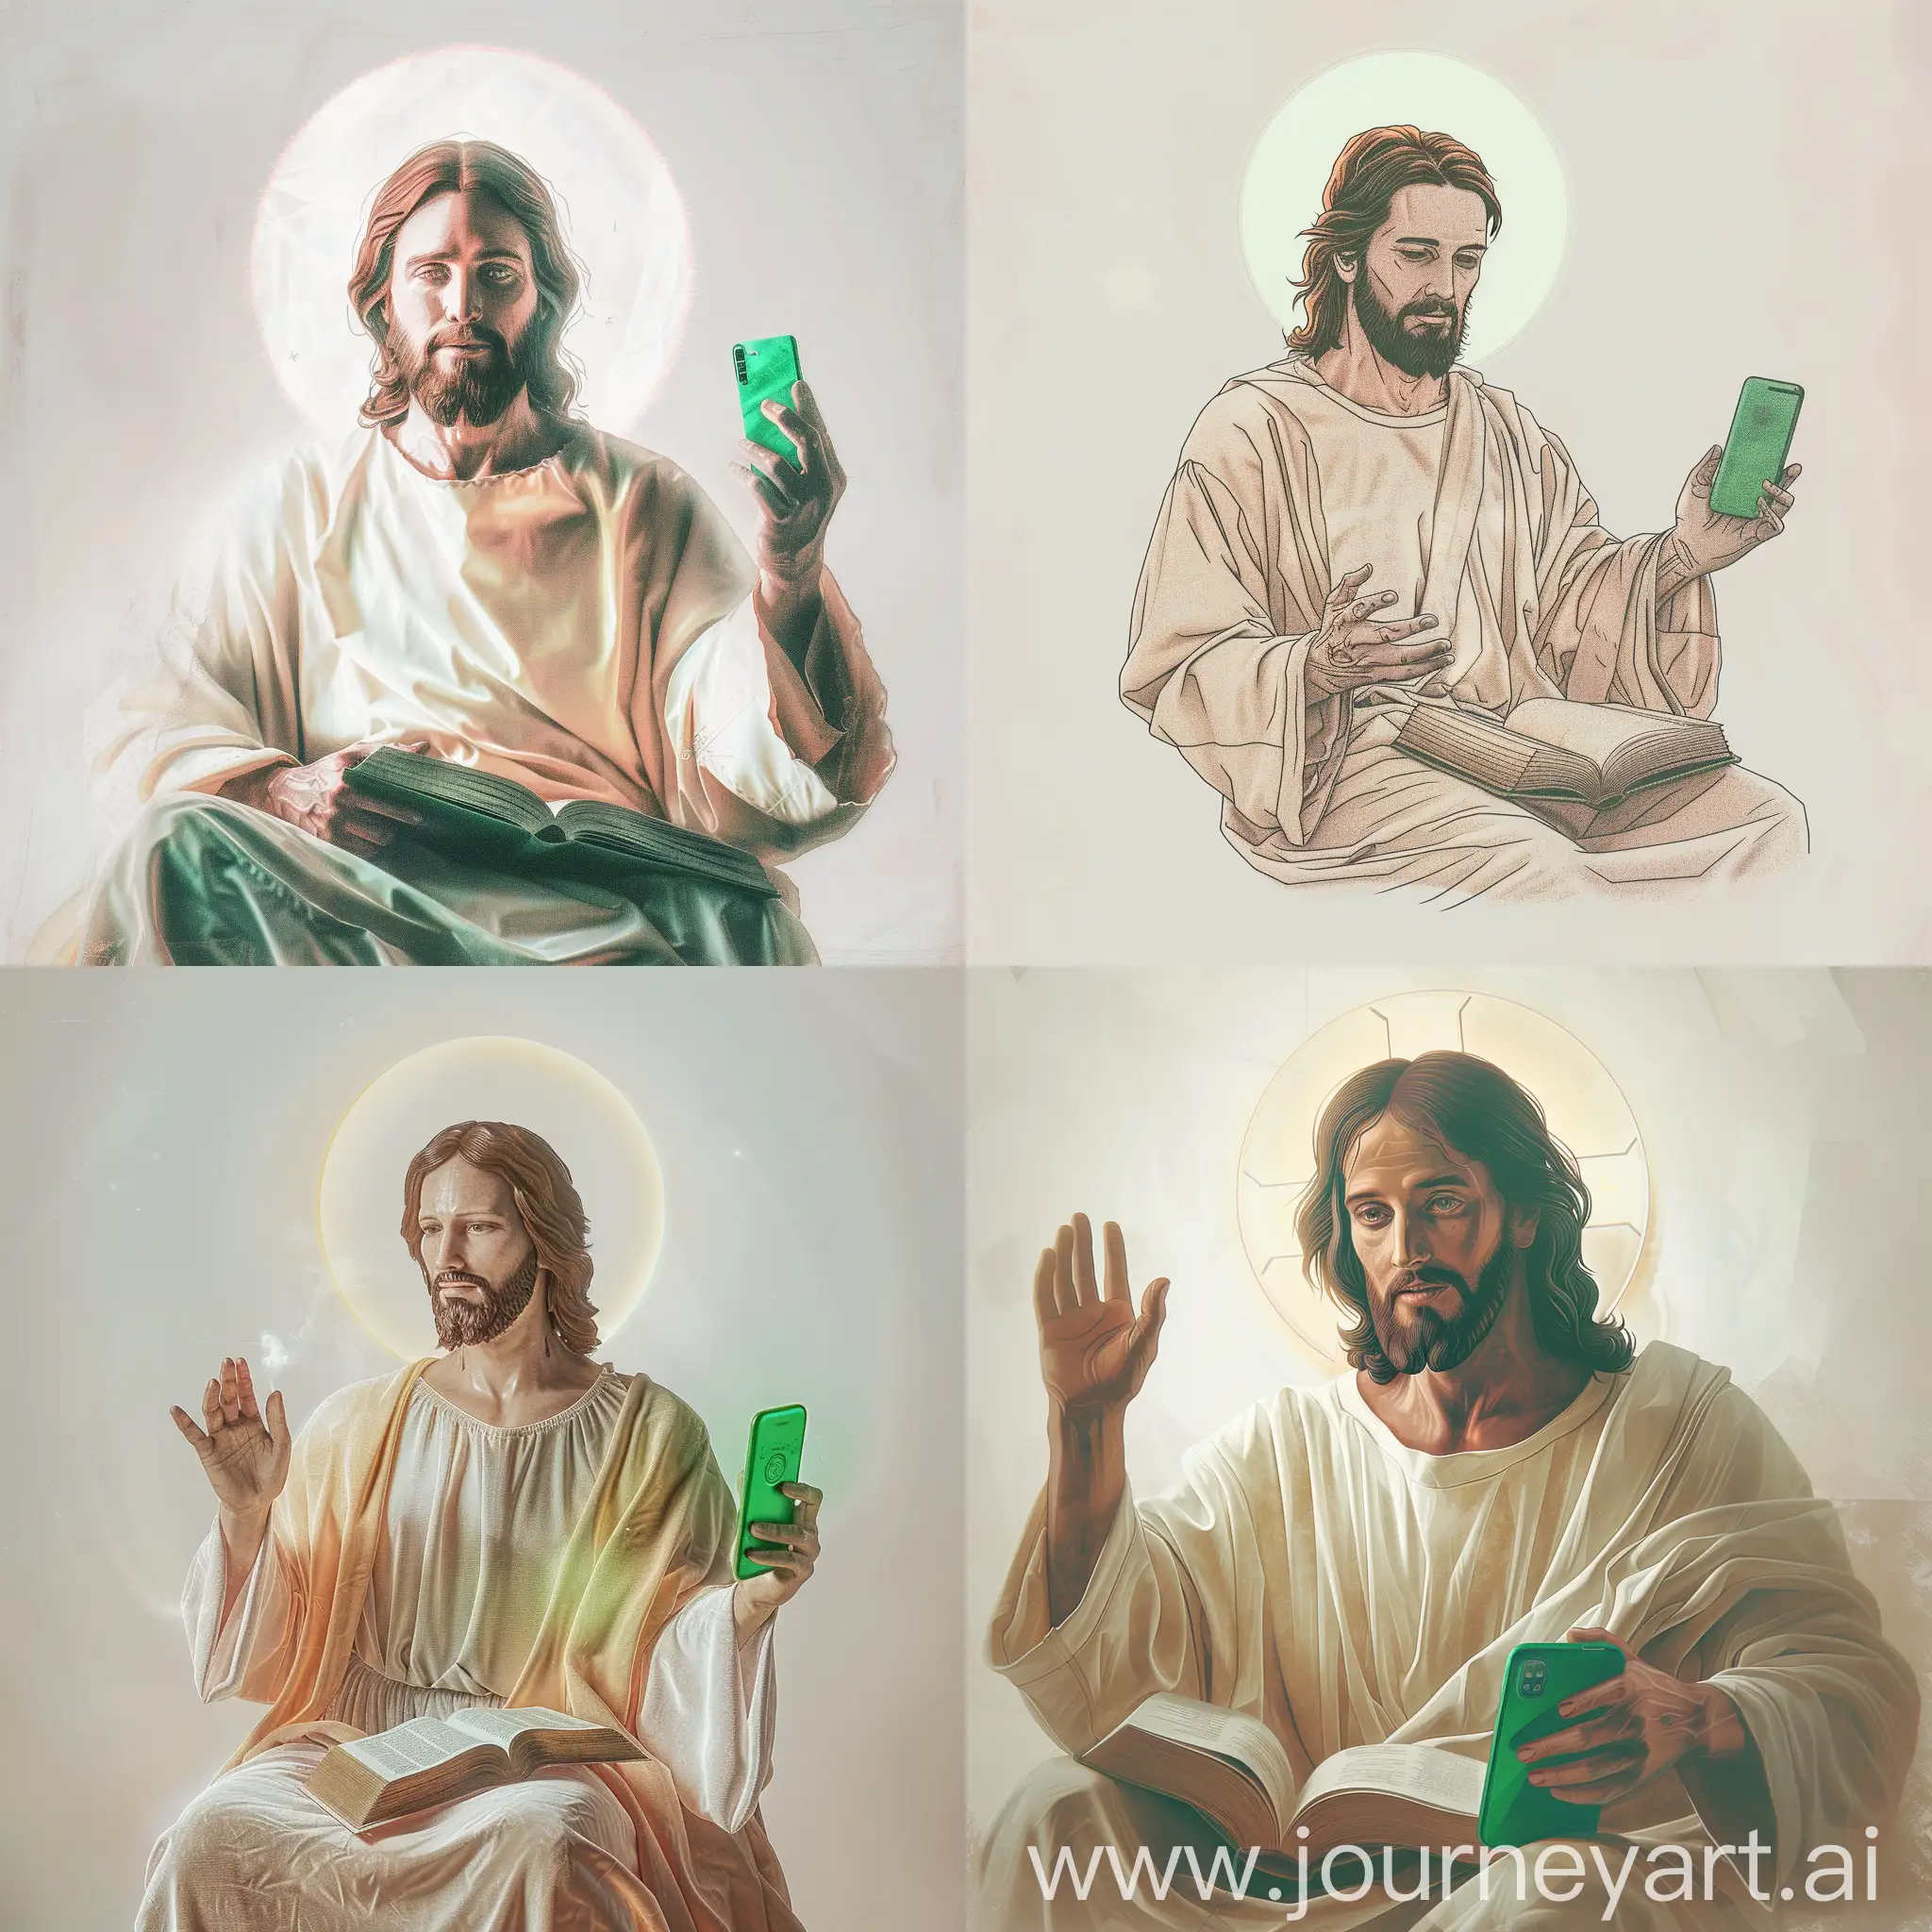 Comforting-Therapist-Jesus-Christ-with-Open-Hand-Gesture-and-Green-Smartphone